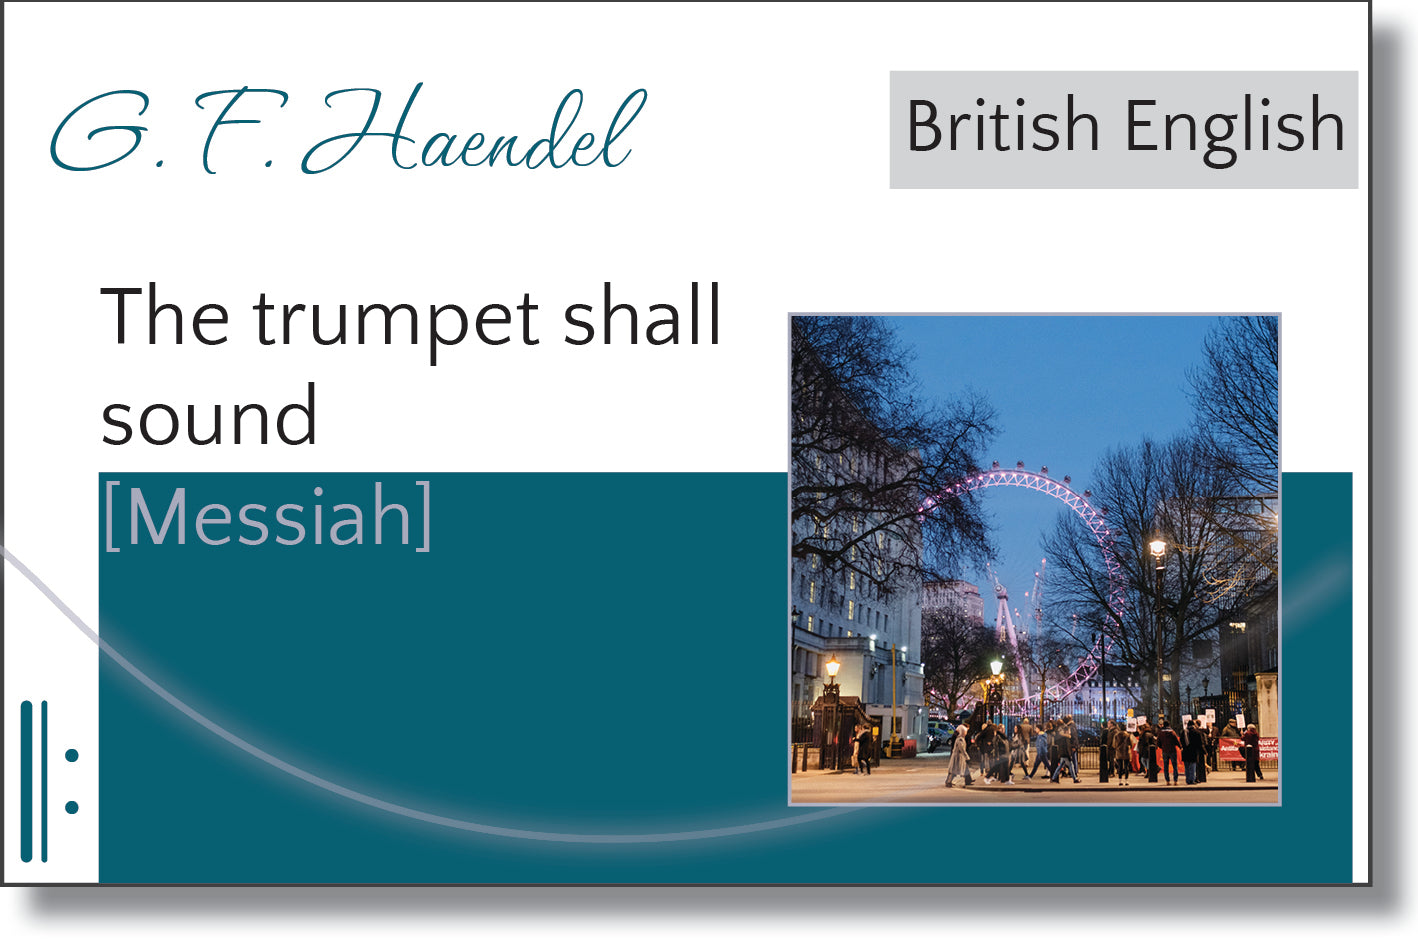 Messiah - The trumpet shall sound